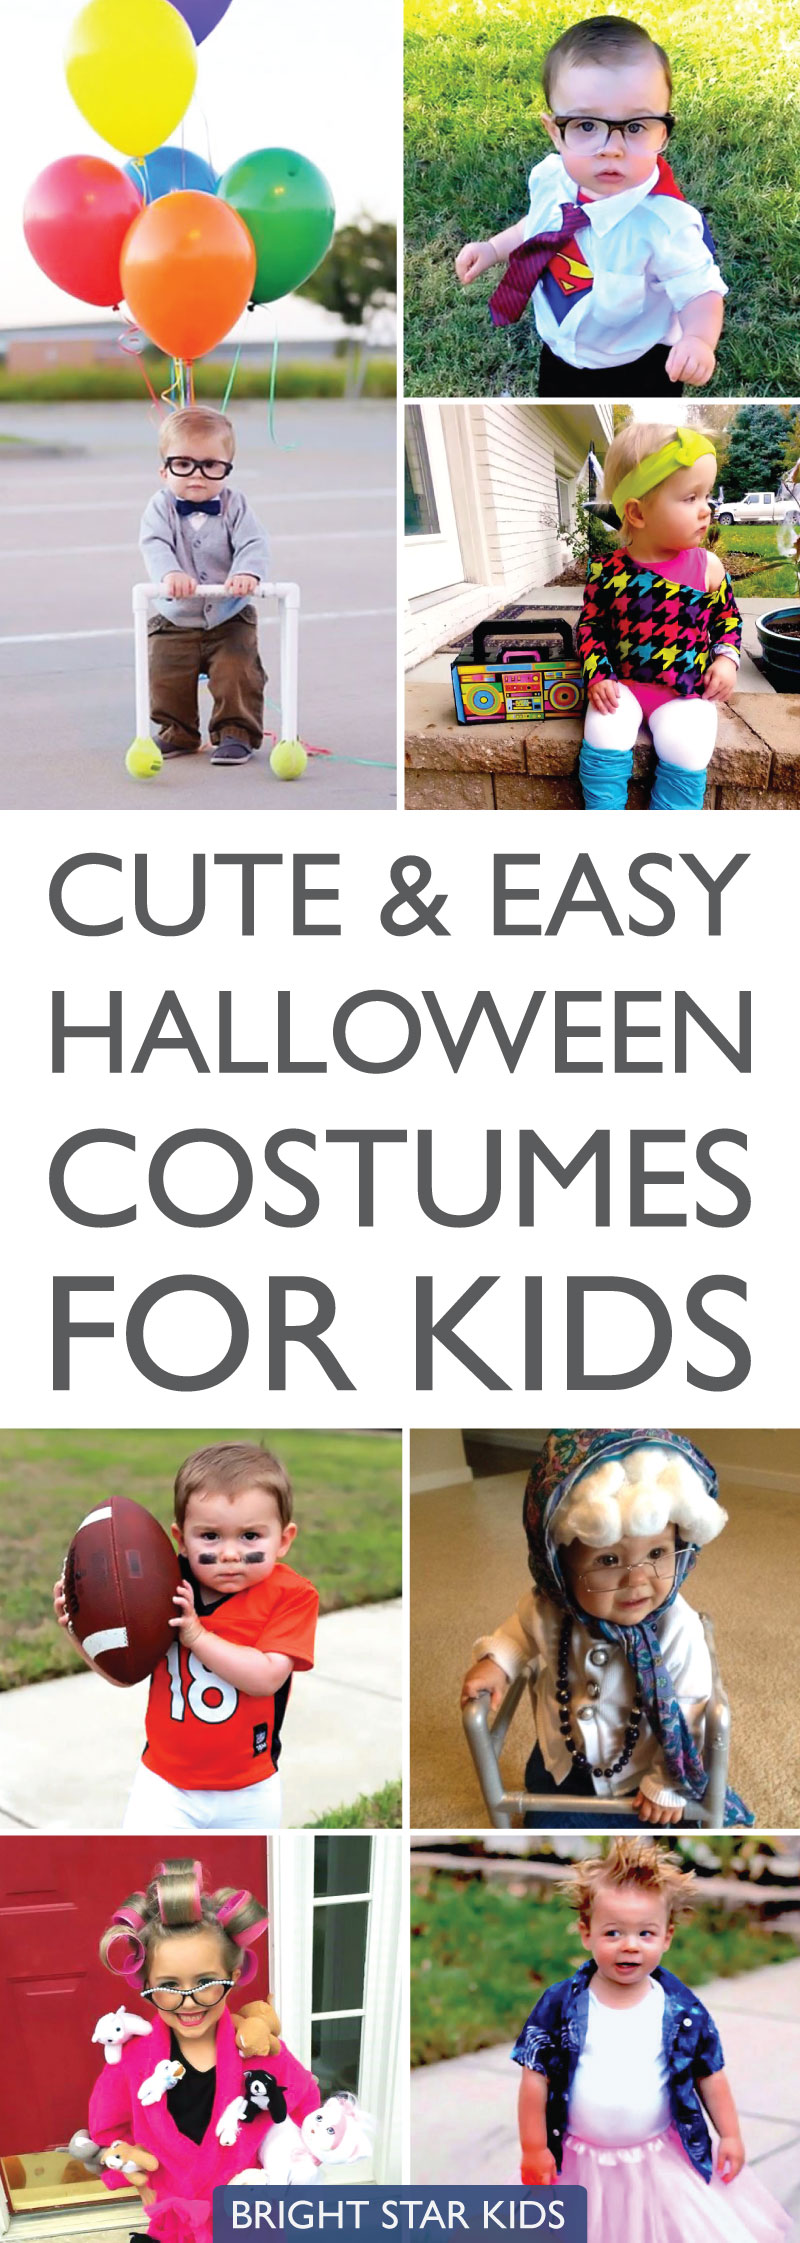 Cute & Easy Halloween Costumes for Kids - Bright Star Kids